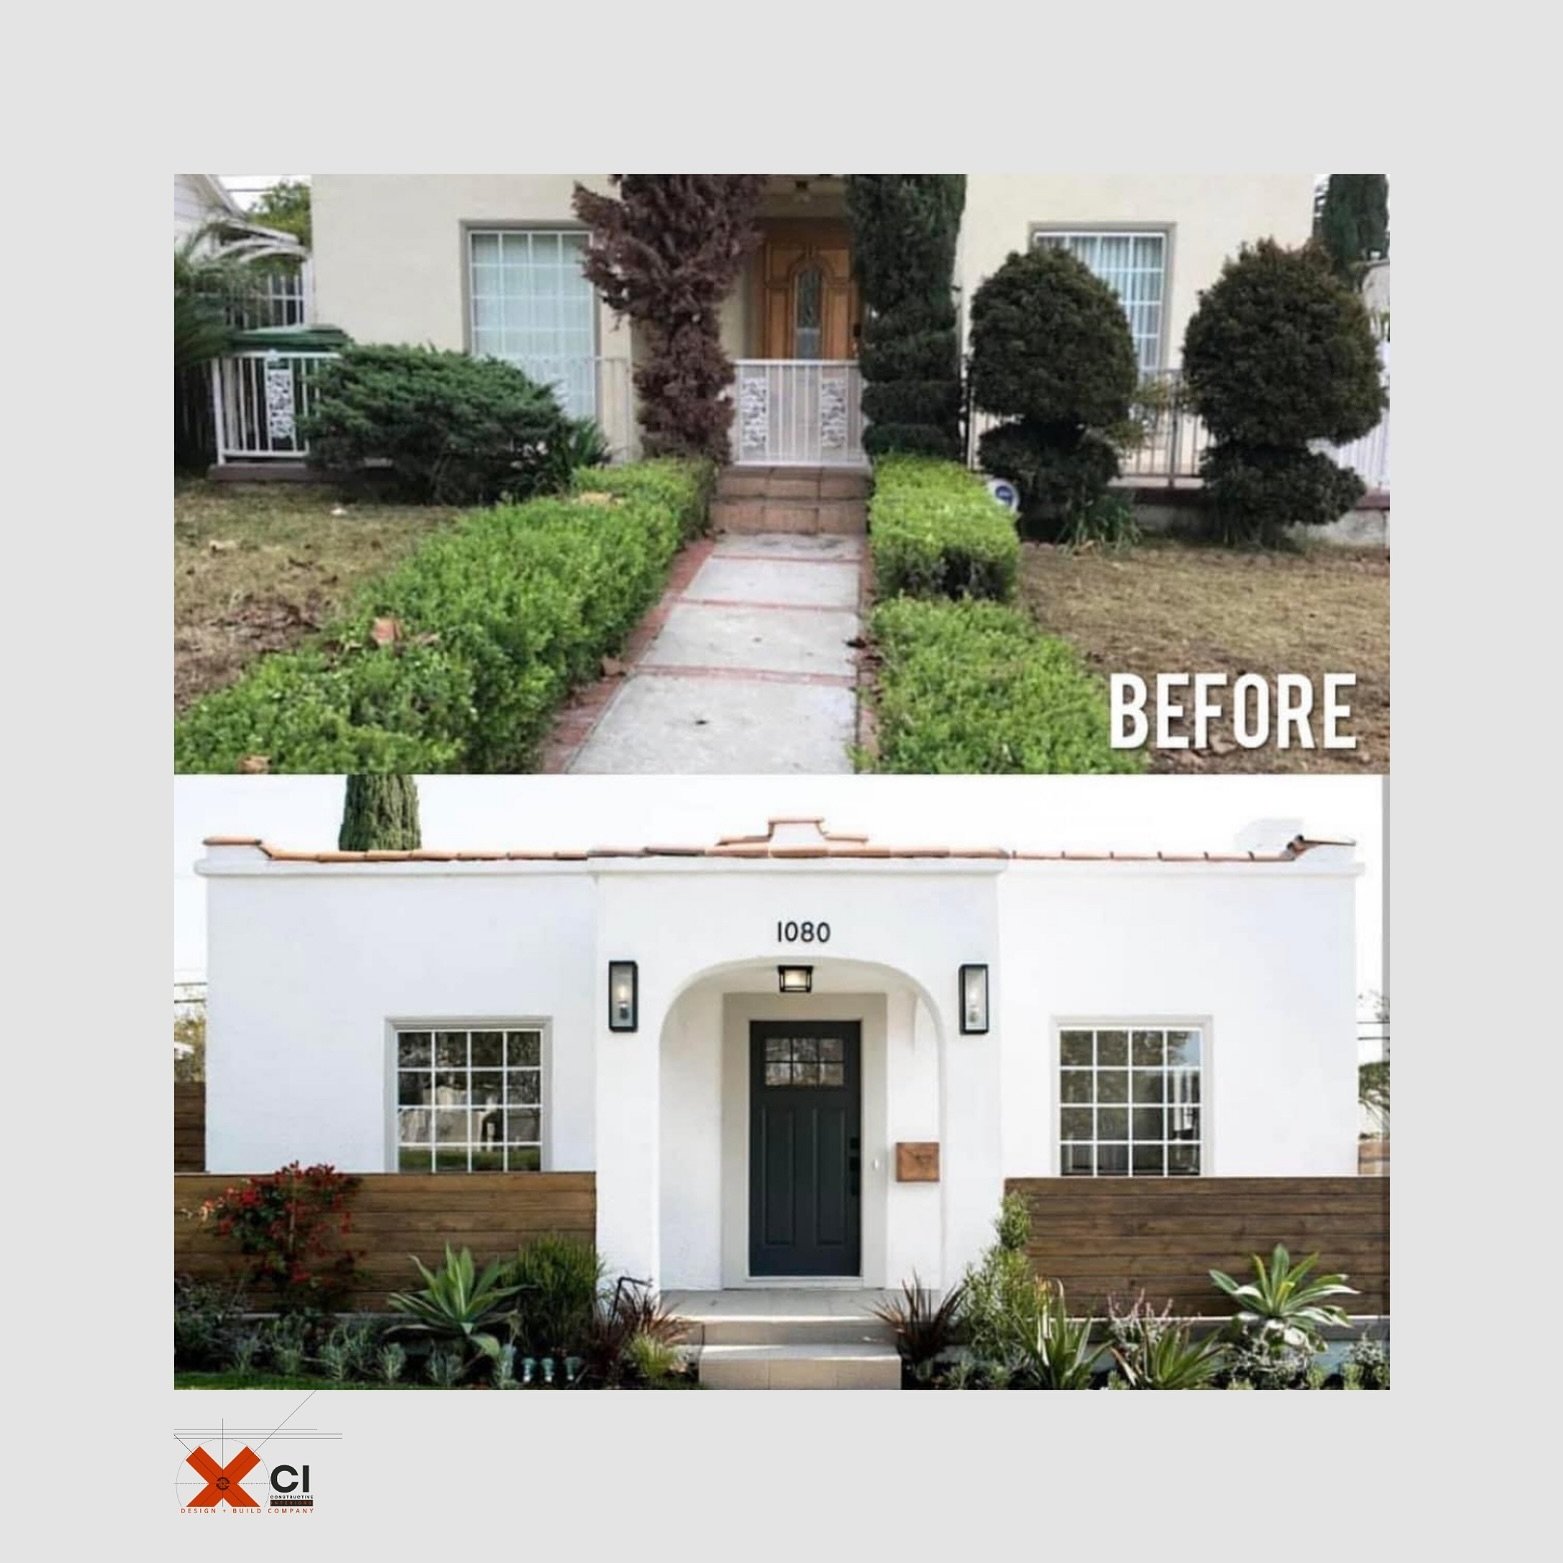 Exterior renovation and curb appeal design for a fix and flip home in the design district, Miami.
Design + Build
From outdated to outstanding! 🏚️➡️🏡 We&rsquo;ll take you through a showcase of before-and-after projects, revealing the artistry of des